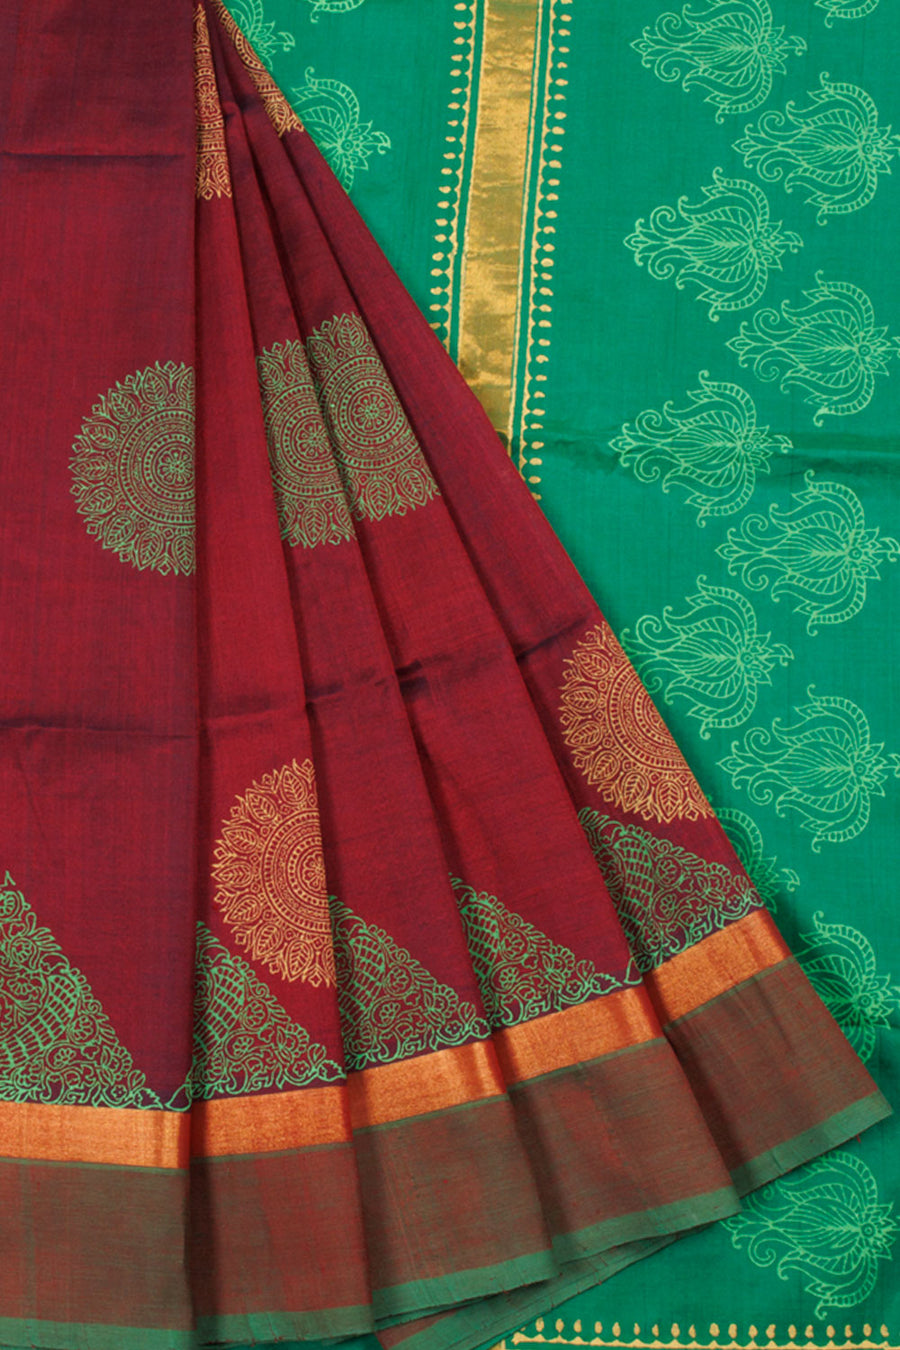 Maroon Hand Block Printed Silk Cotton Saree with Floral Motifs and Floral Design Pallu